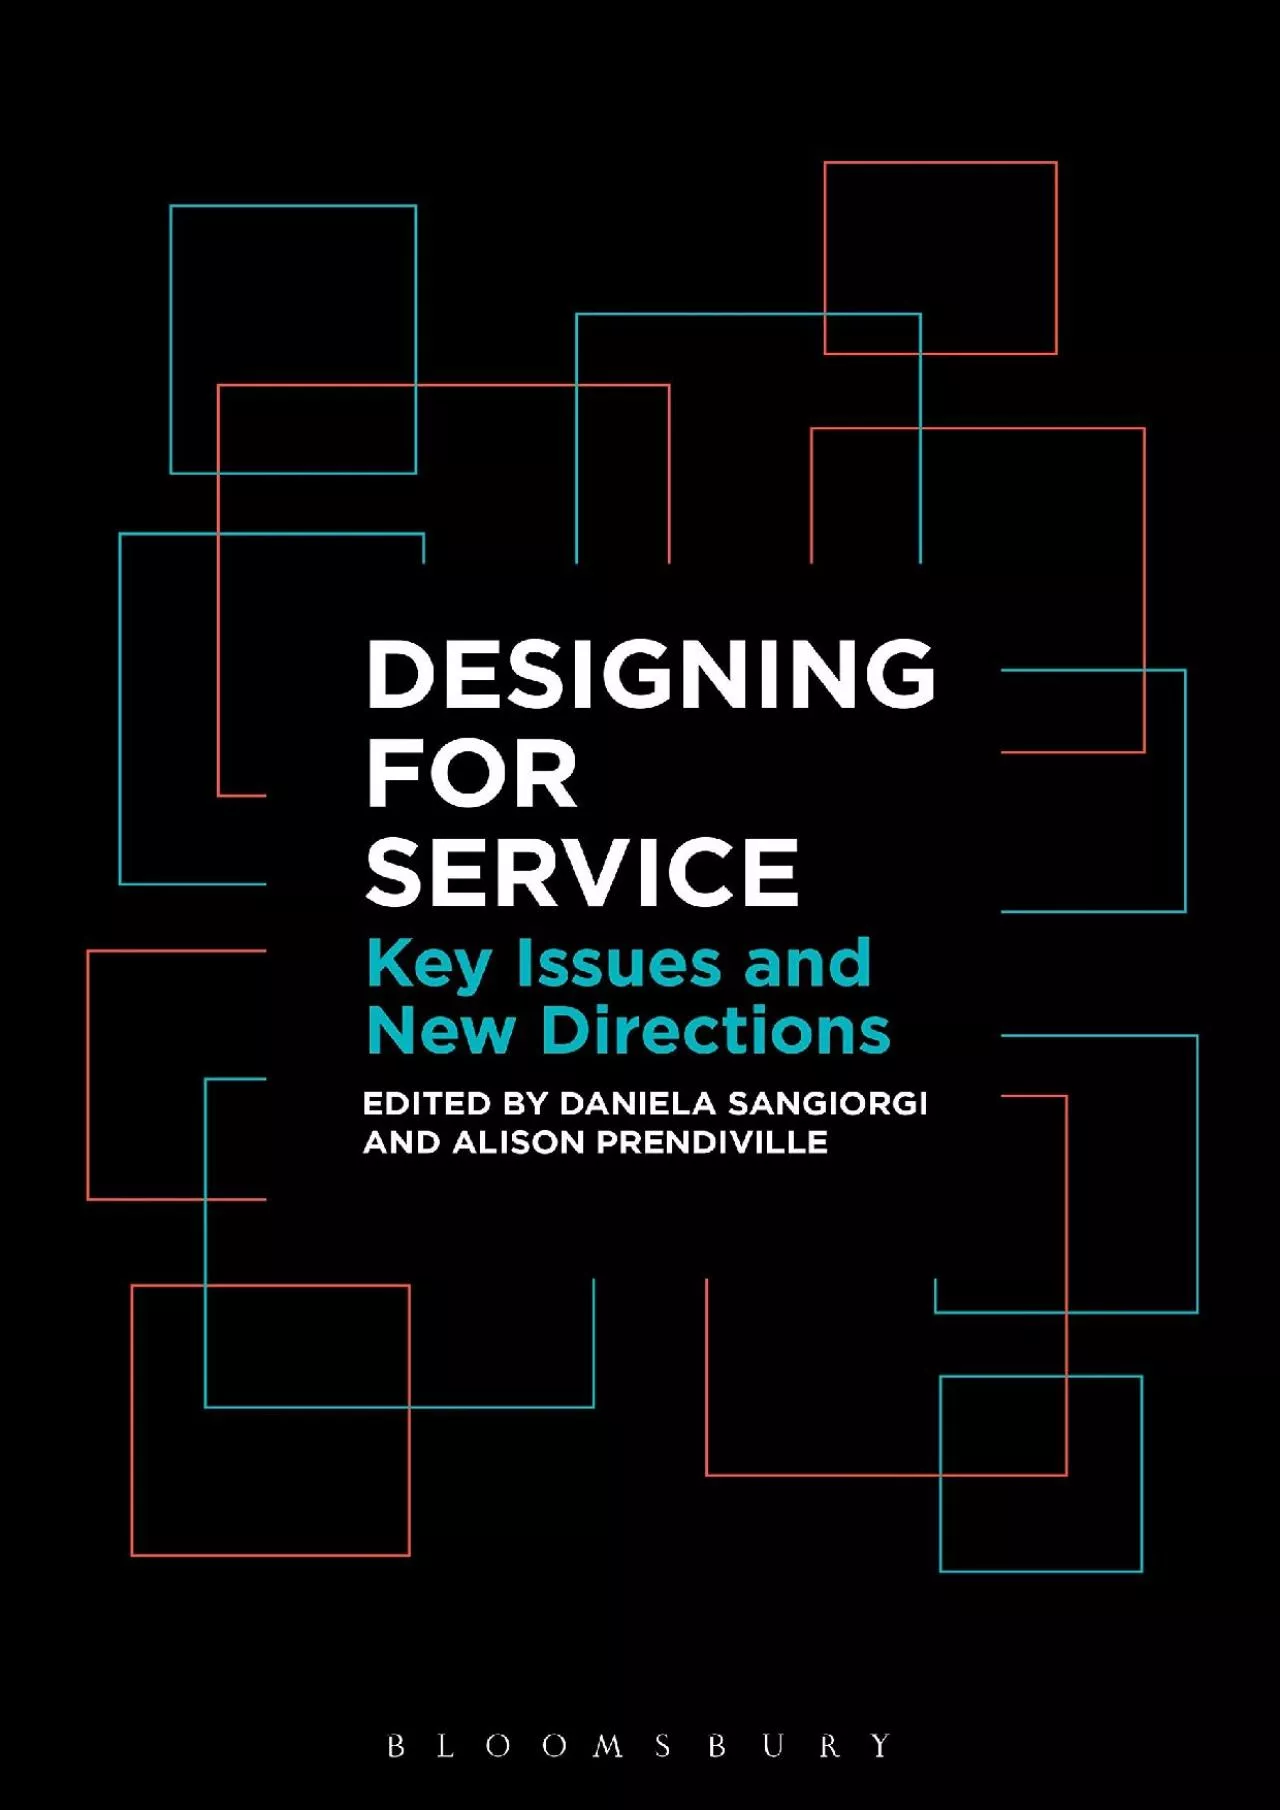 (EBOOK)-Designing for Service Key Issues and New Directions